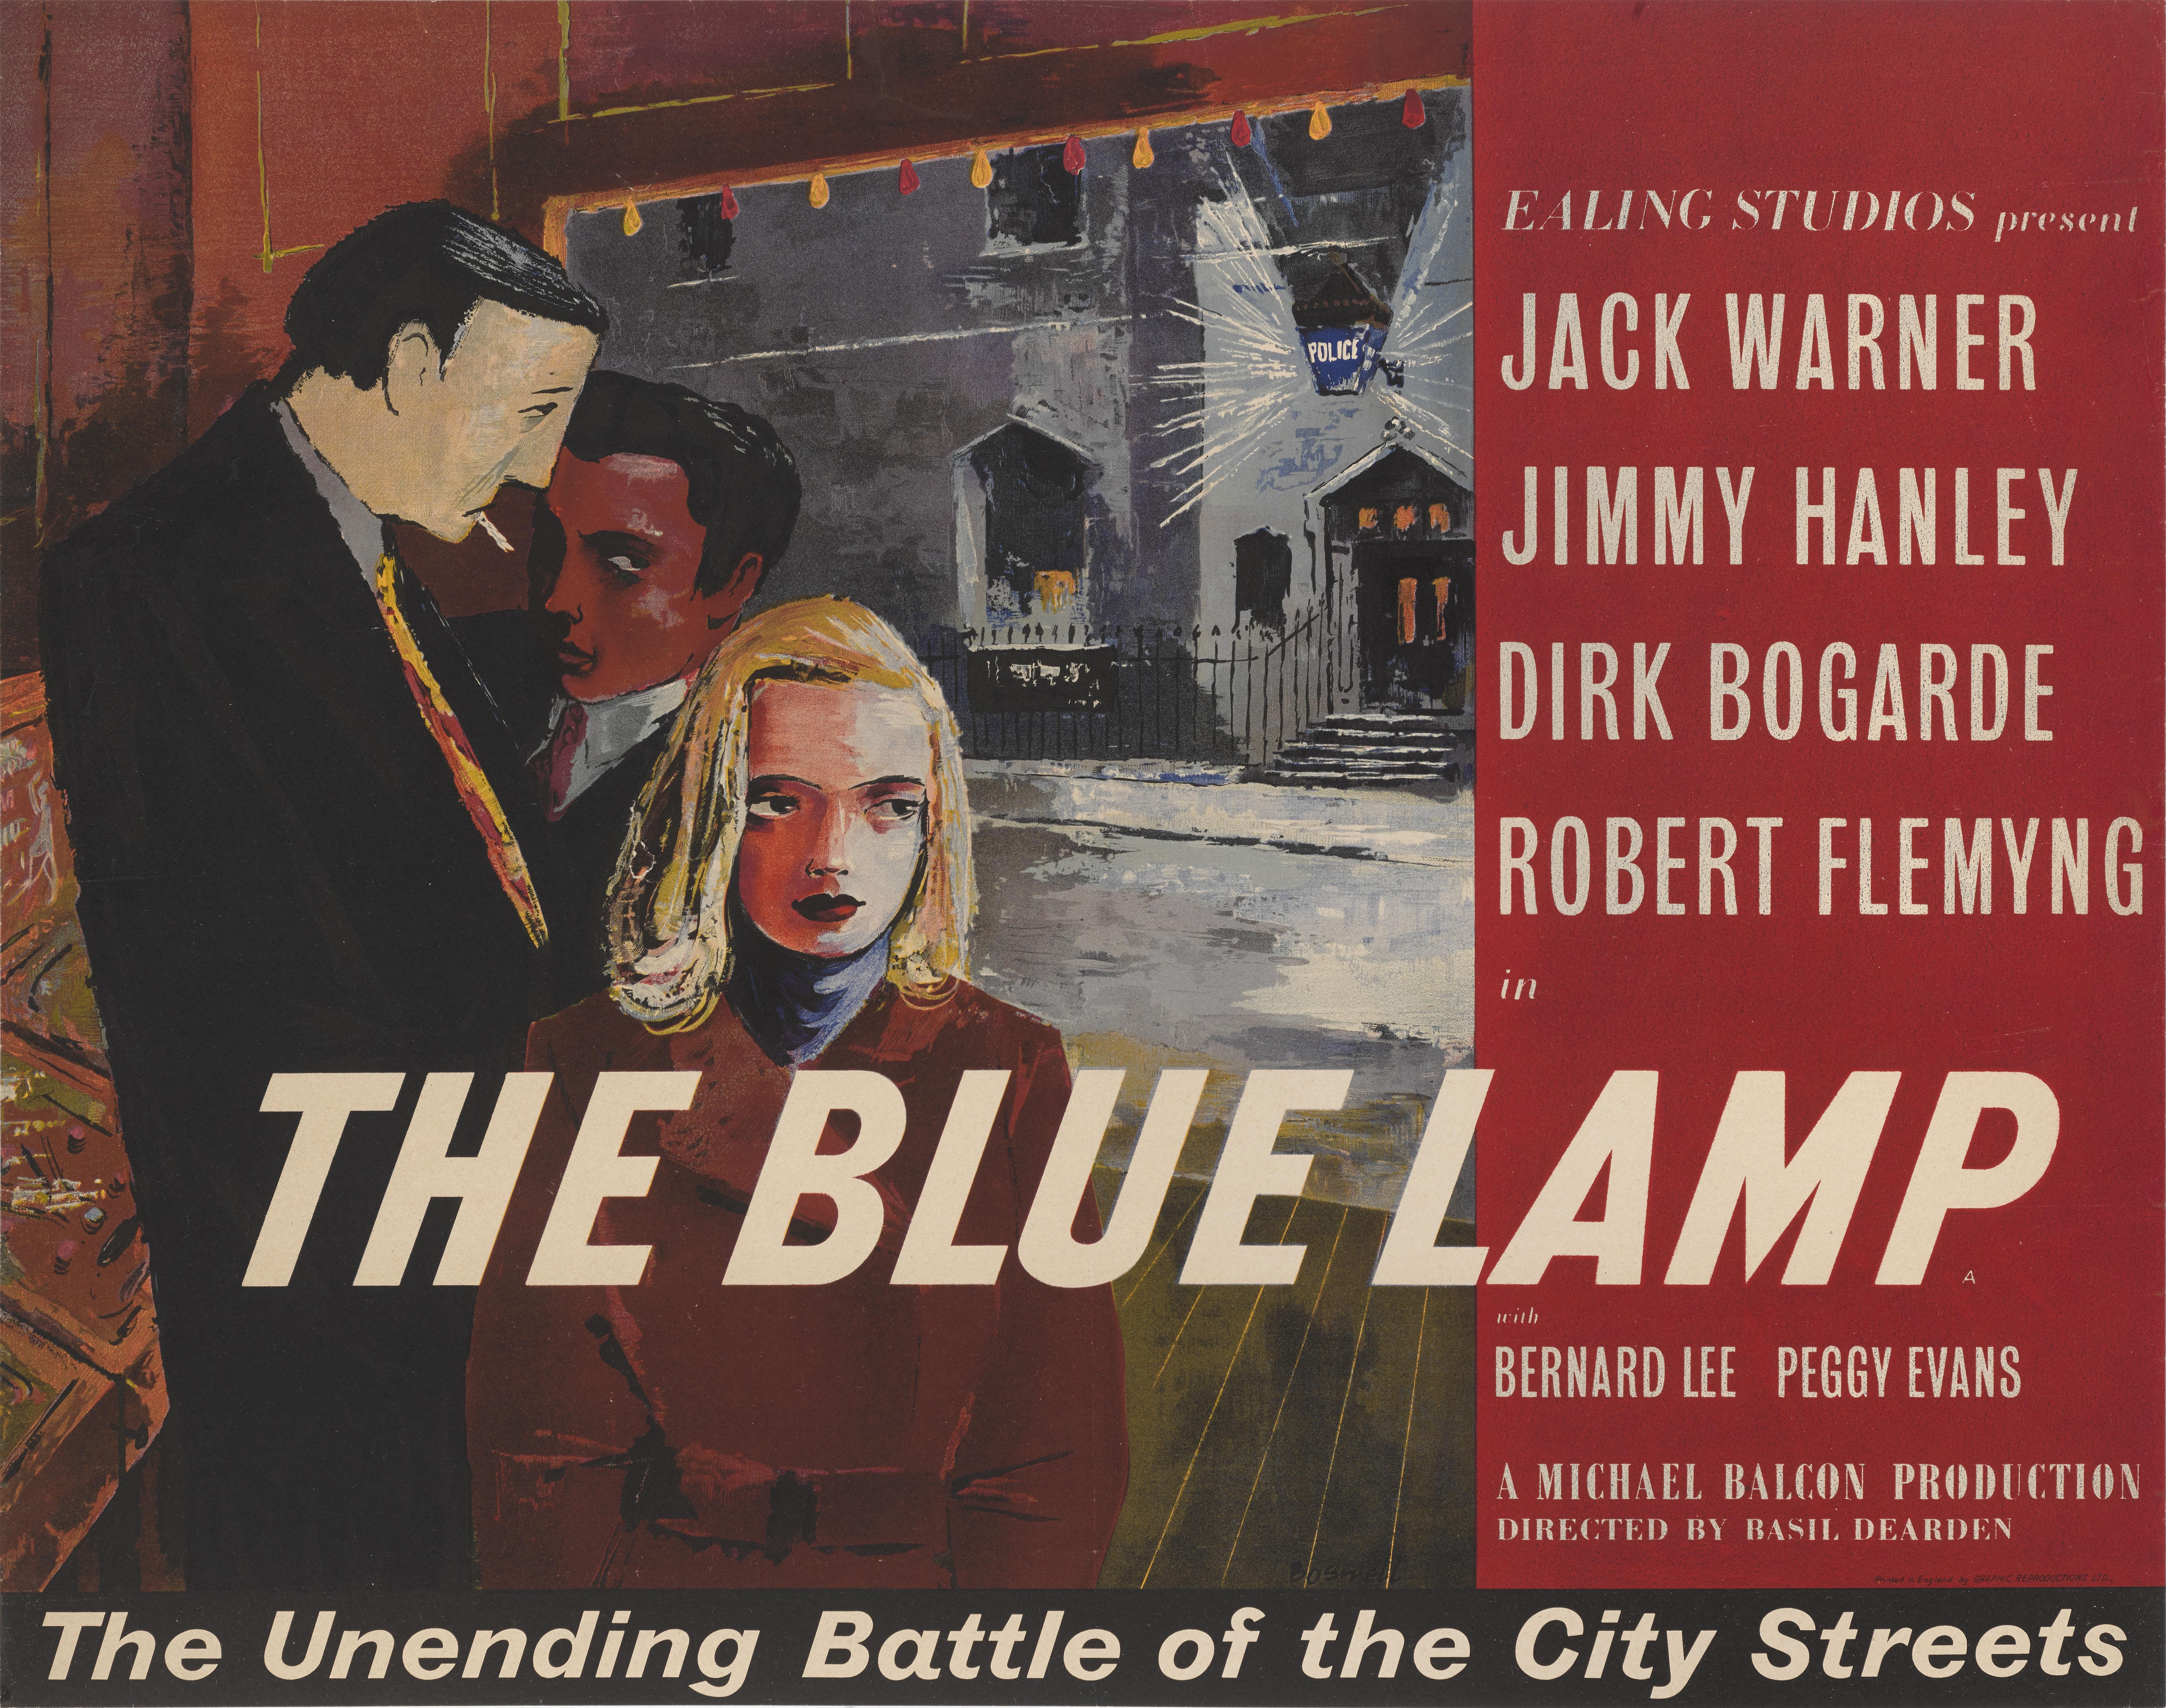 This British drama was directed by Basil Dearden and stars Jack Warner as PC Dixon, Jimmy Hanley and Dirk Bogarde. The title refers to the blue lantern that is outside British police stations to signify it as a place of safe refuge. The film